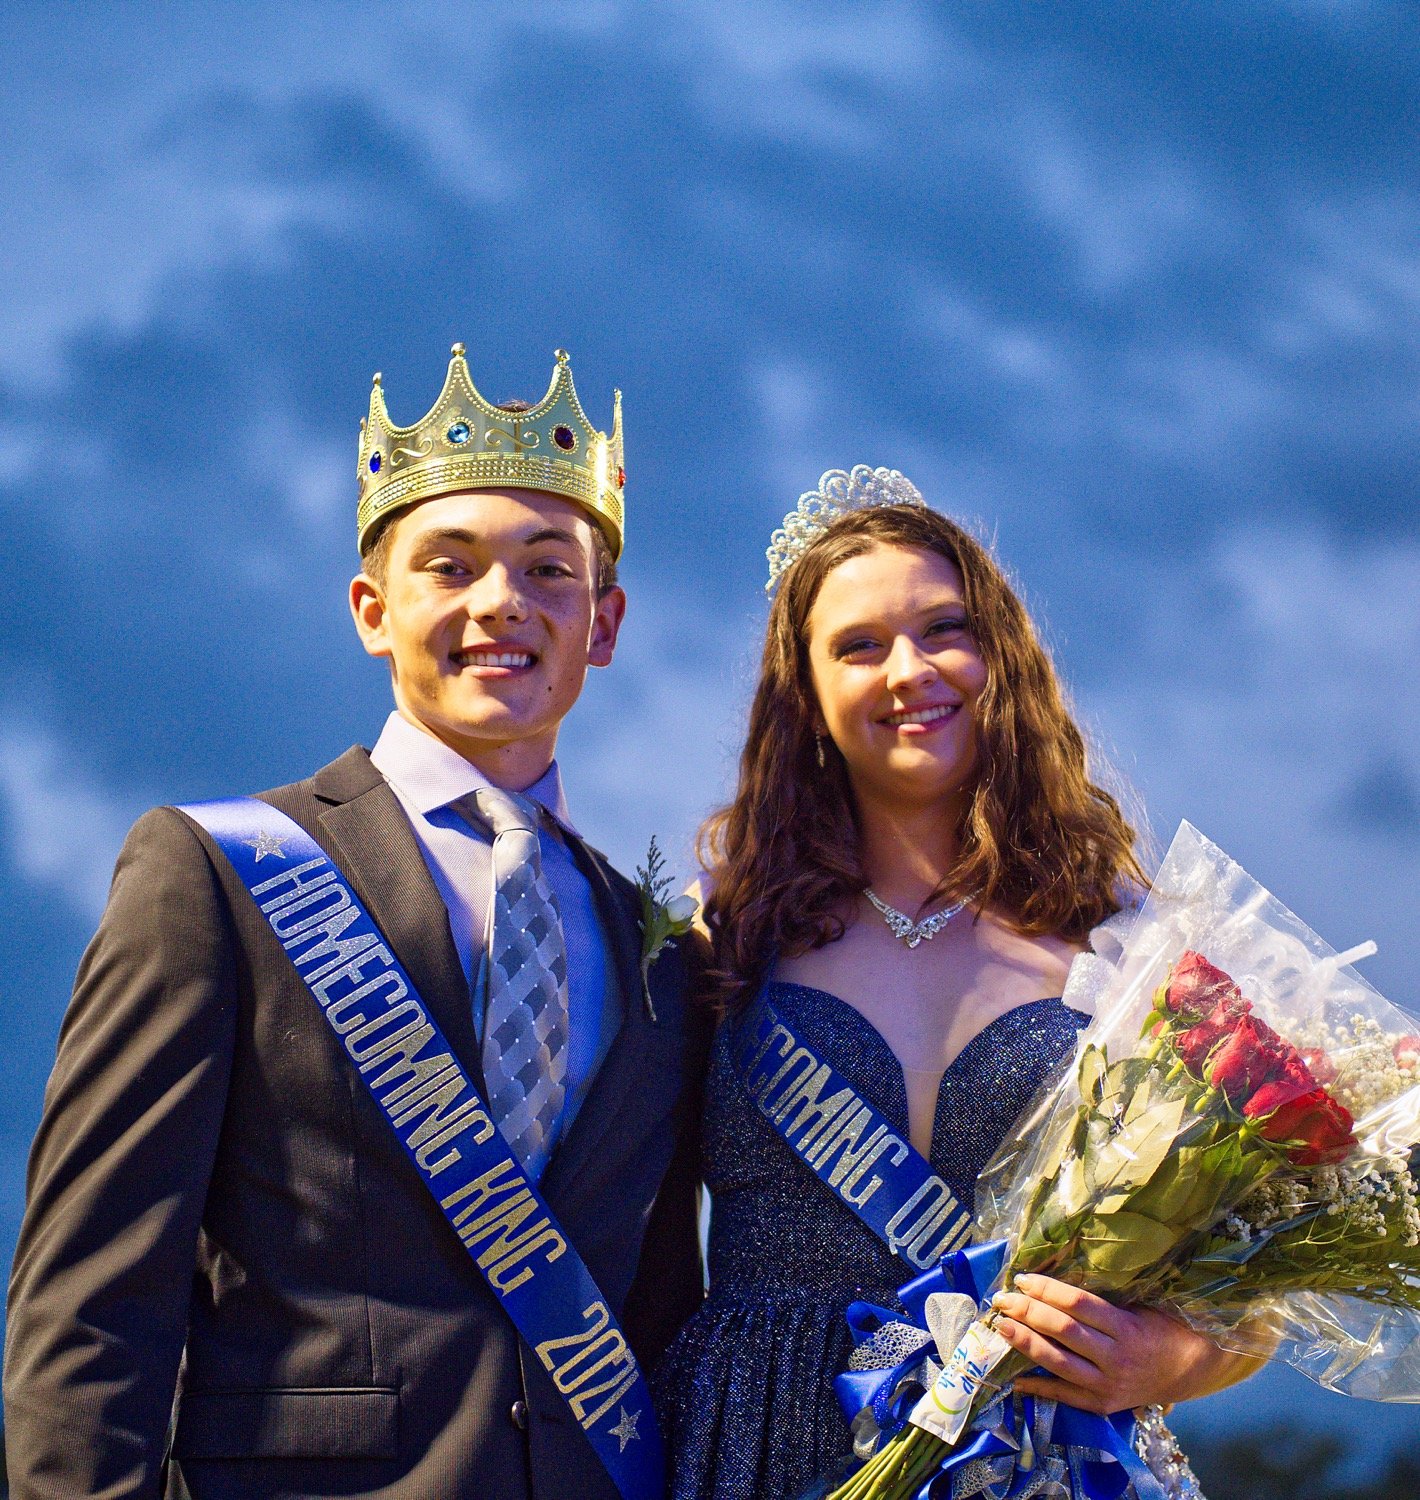 Sara Cross and Brandon Jimenez were crowned Quitman homecoming 2021 queen and king during ceremonies prior to Quitman’s football game with Winona Friday. [See more from the Quitman homecoming game.]